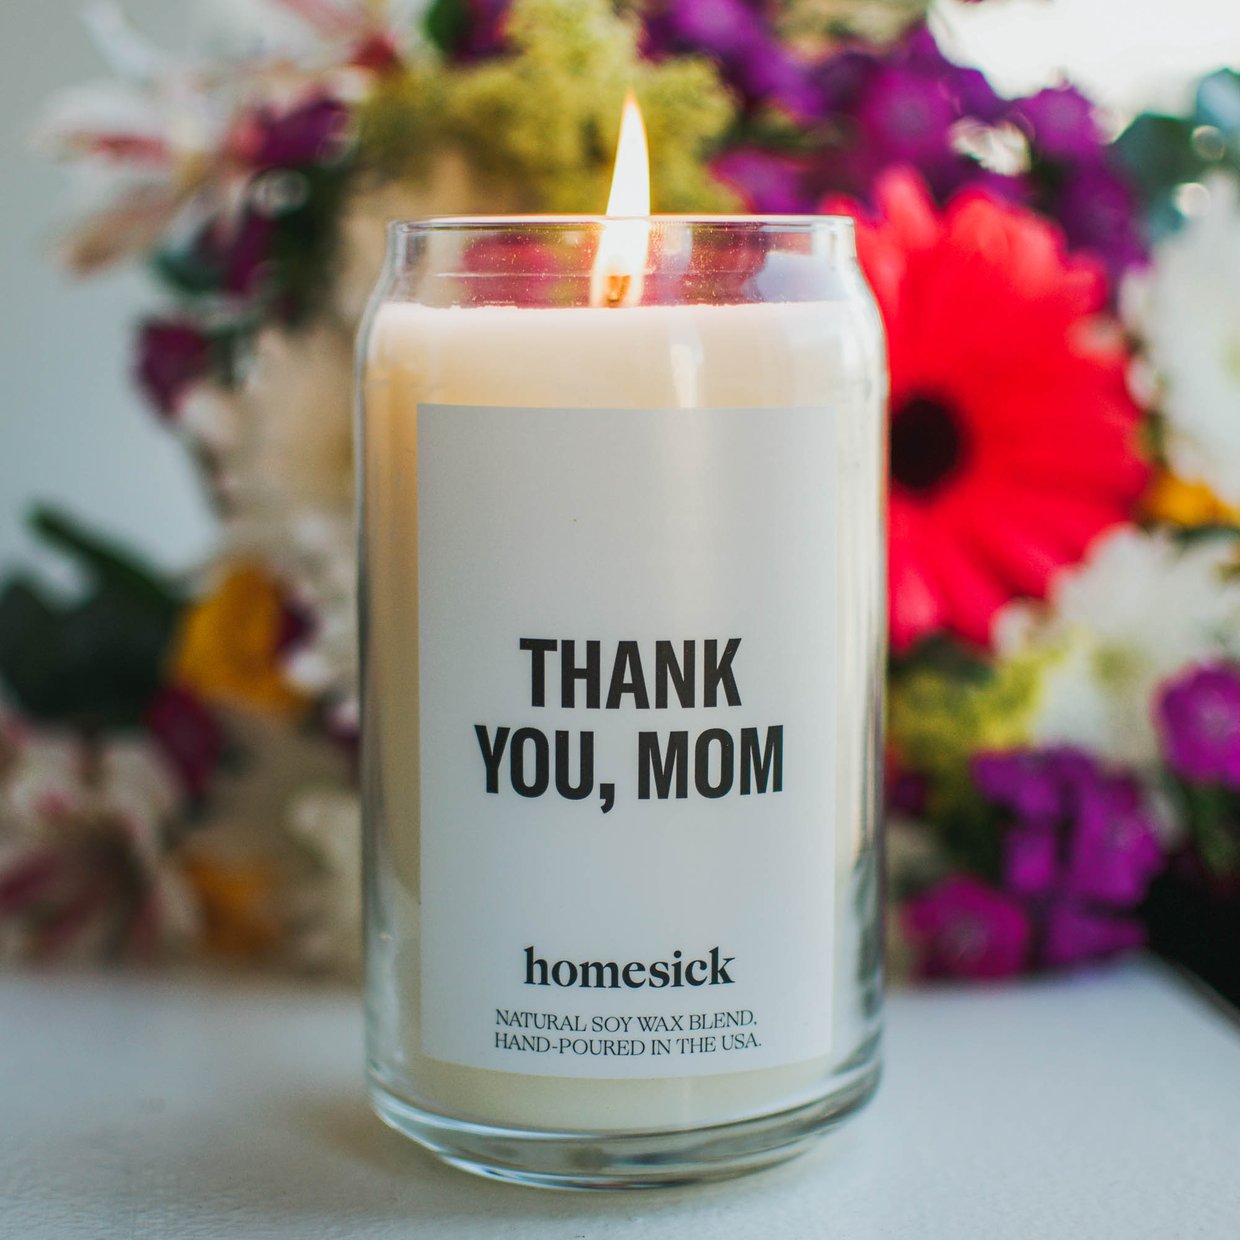 Homesick Homesick Thank You, Mom Candle available at The Good Life Boutique